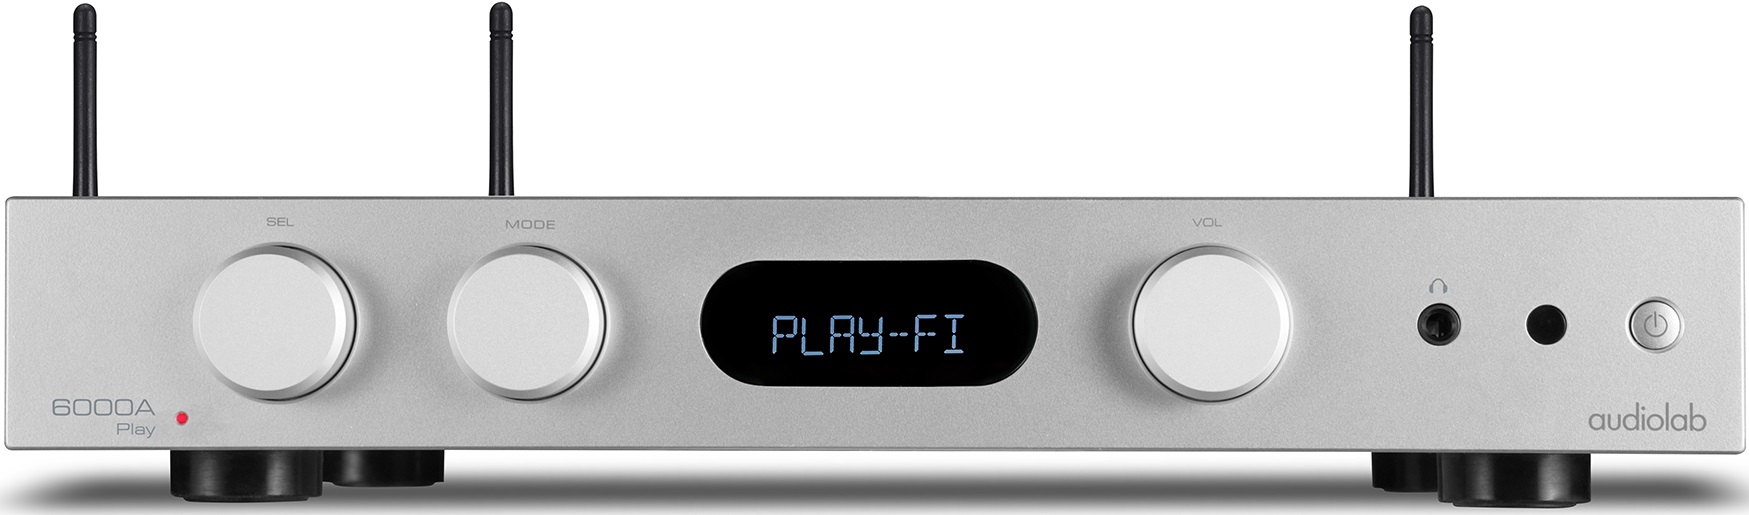 audiolab-6000a-play-integrated-amp-streamer-dac-silver